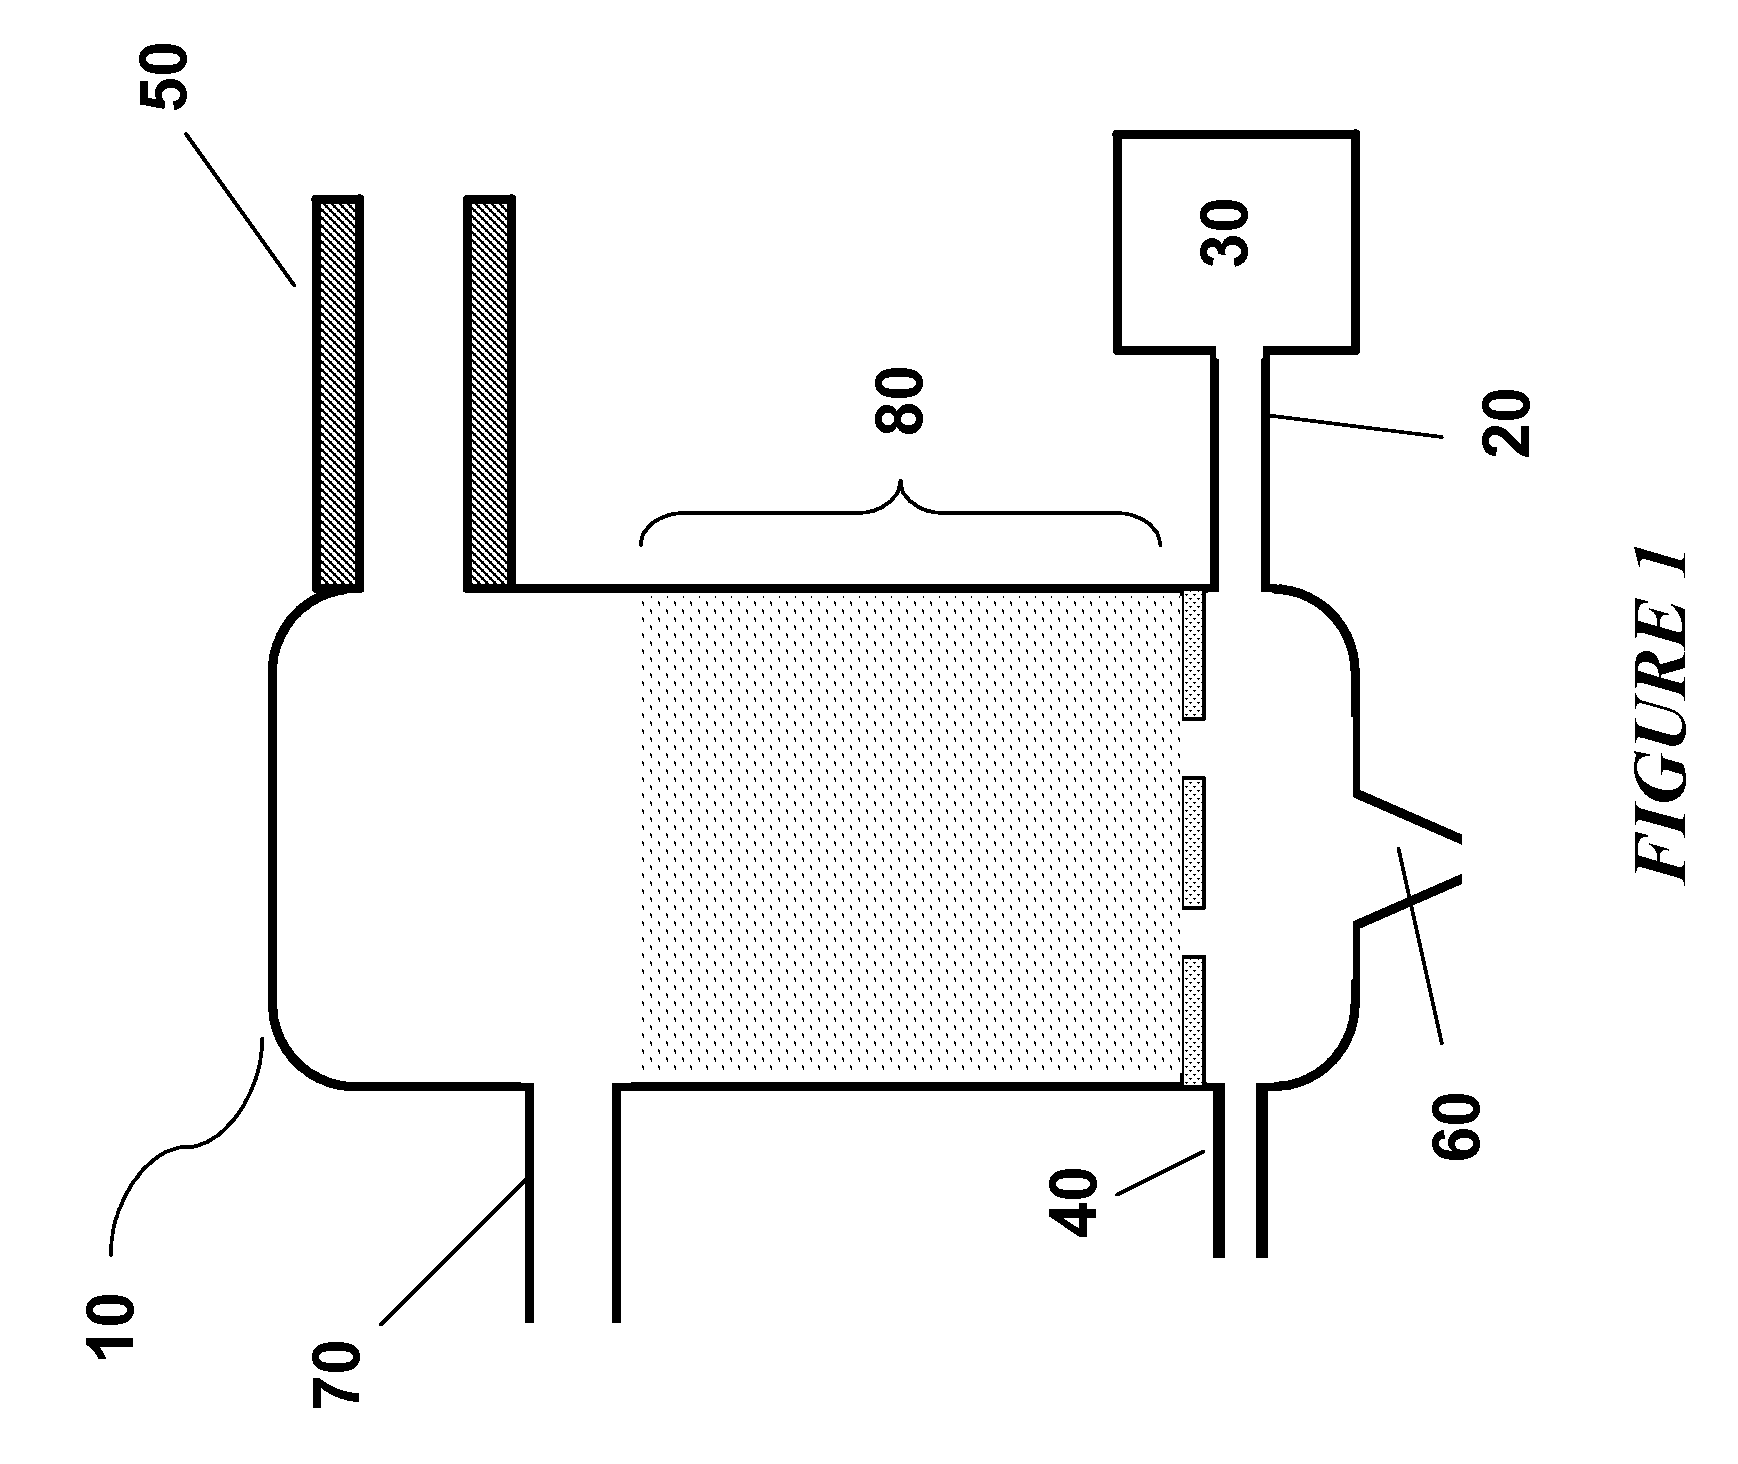 Steam Generating Slurry Gasifier for the Catalytic Gasification of a Carbonaceous Feedstock